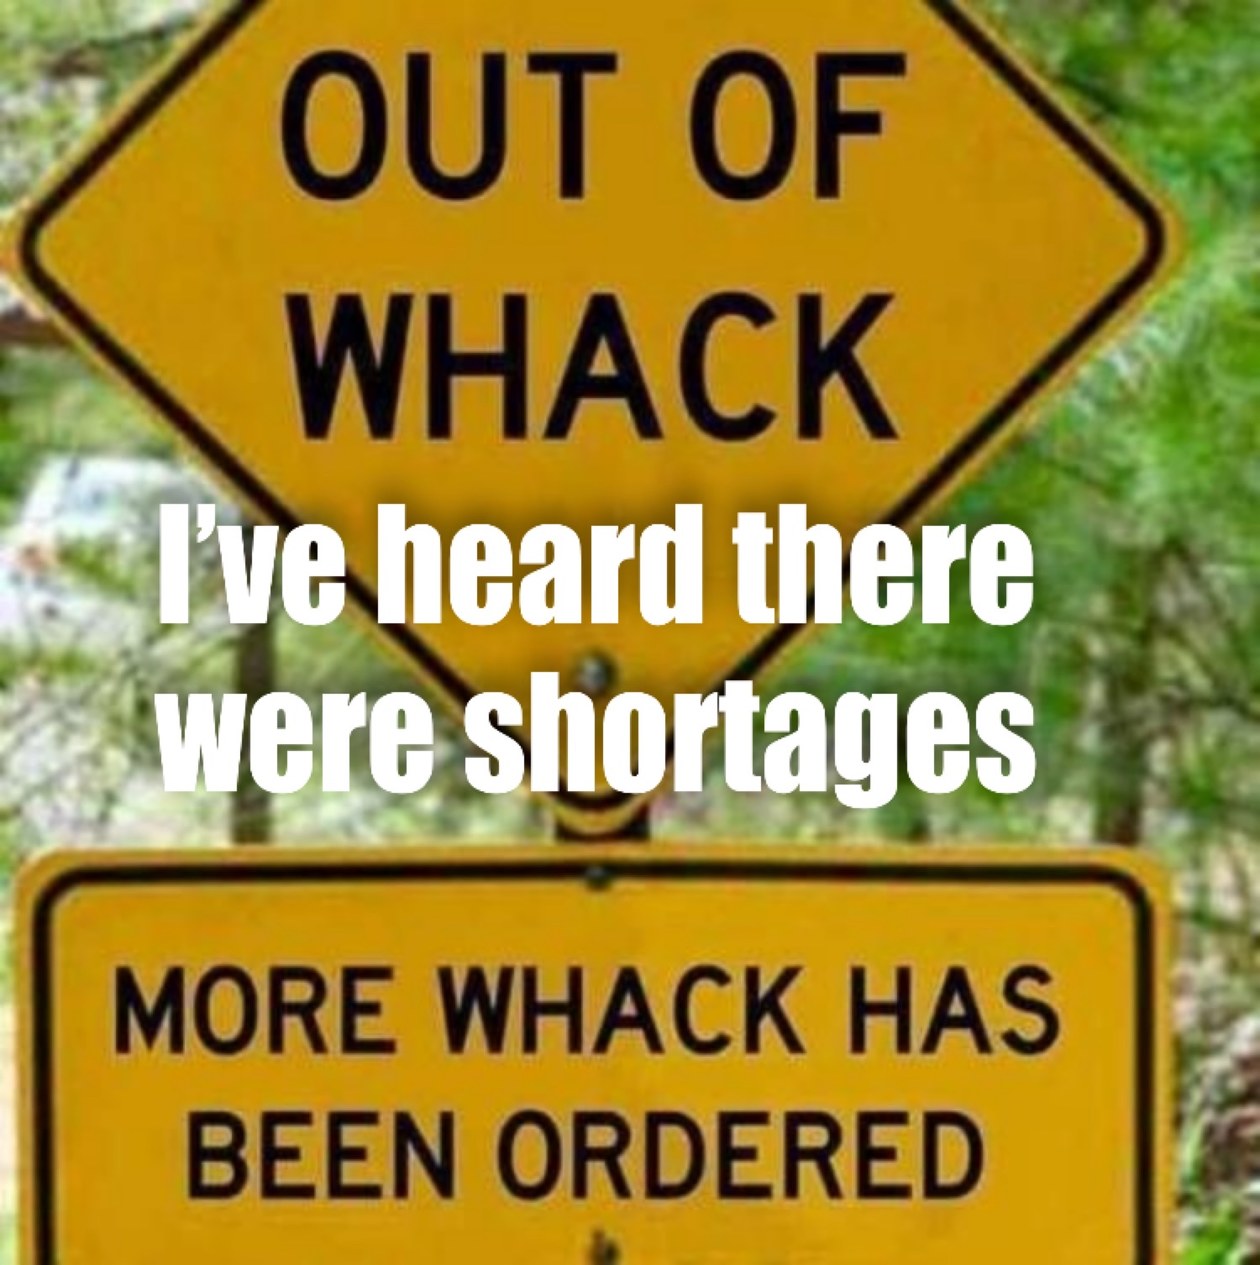 This shortage has reached crisis proportions. Seriously can you recall a time when we have been more out of wack then now? - meme